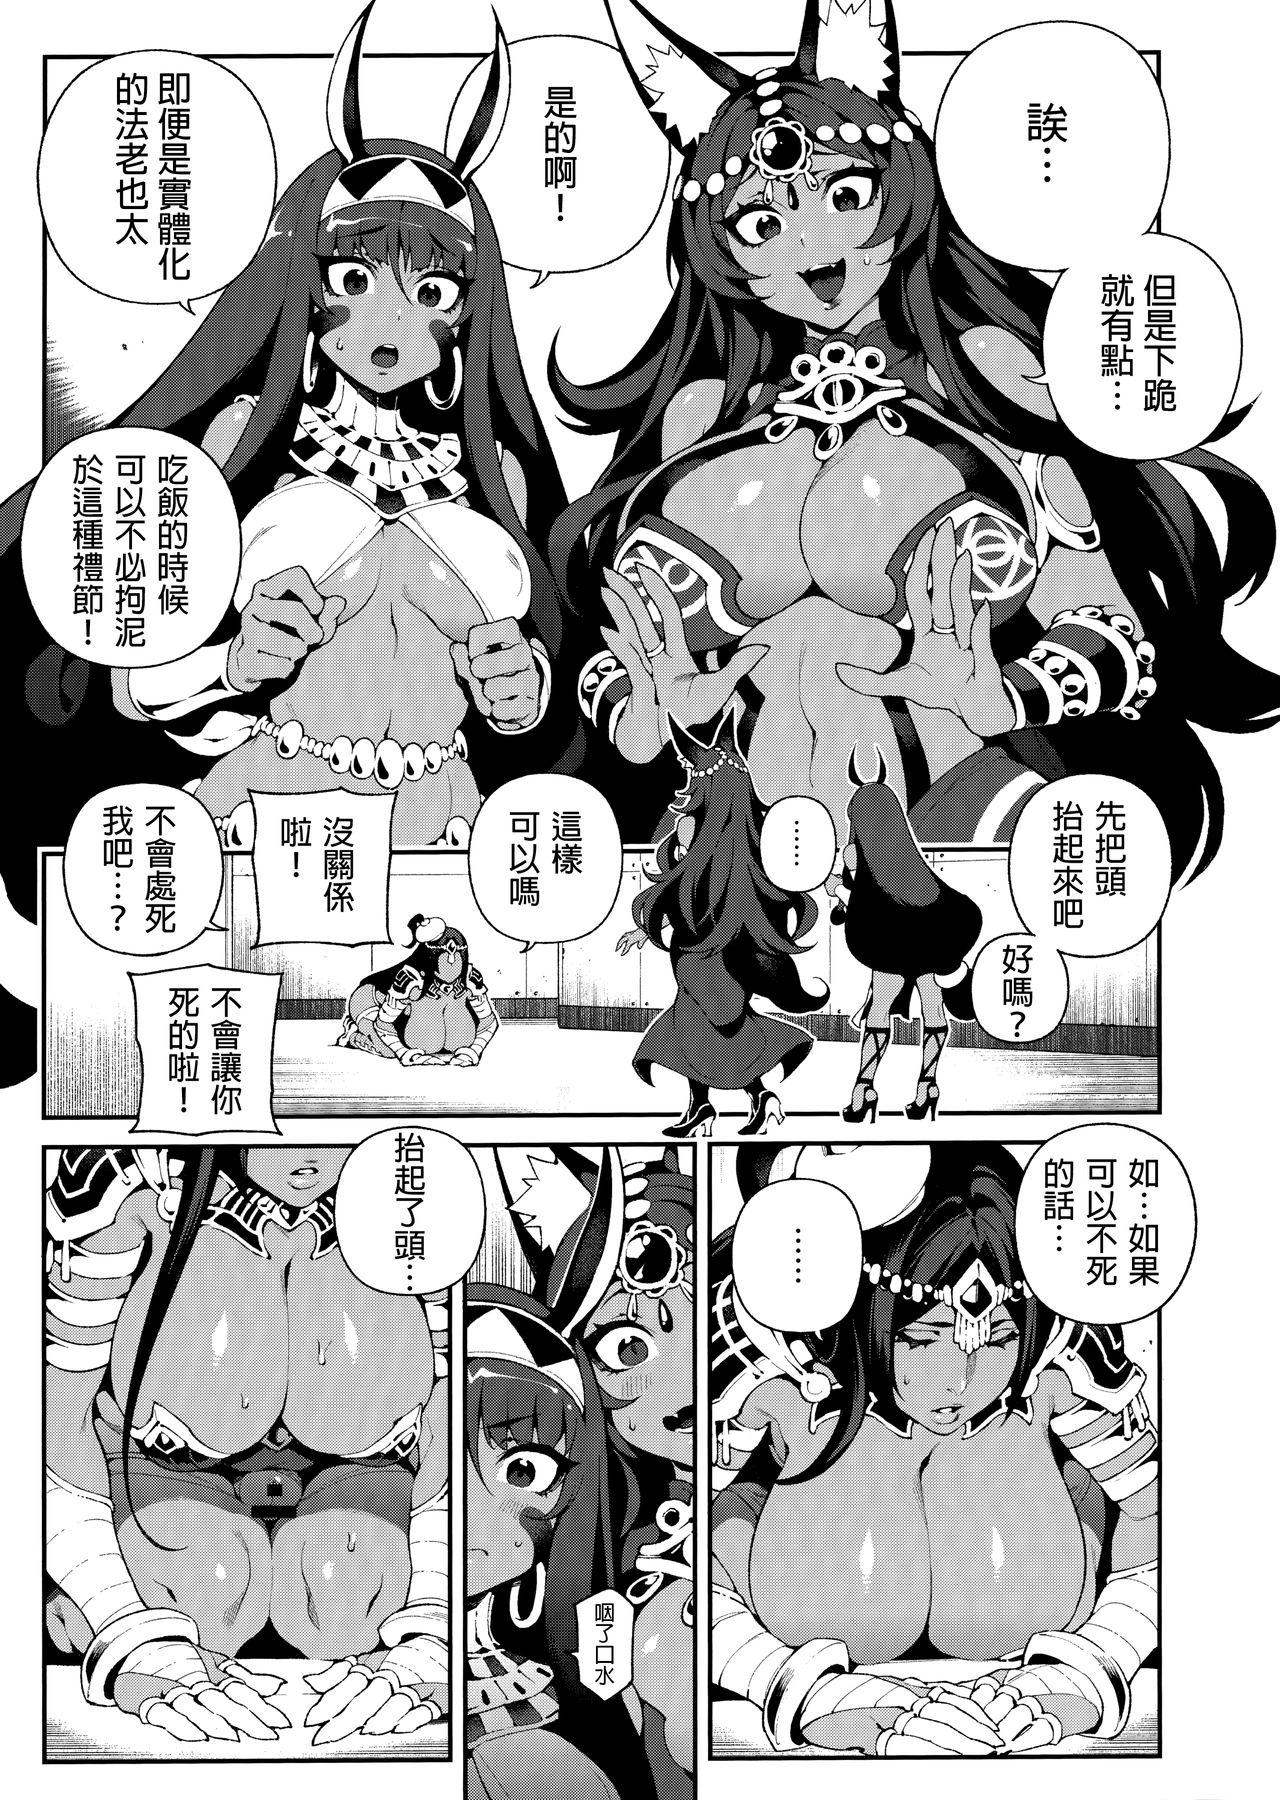 Gapes Gaping Asshole CHALDEA MANIA - Trio Brown - Fate grand order Dyke - Page 4